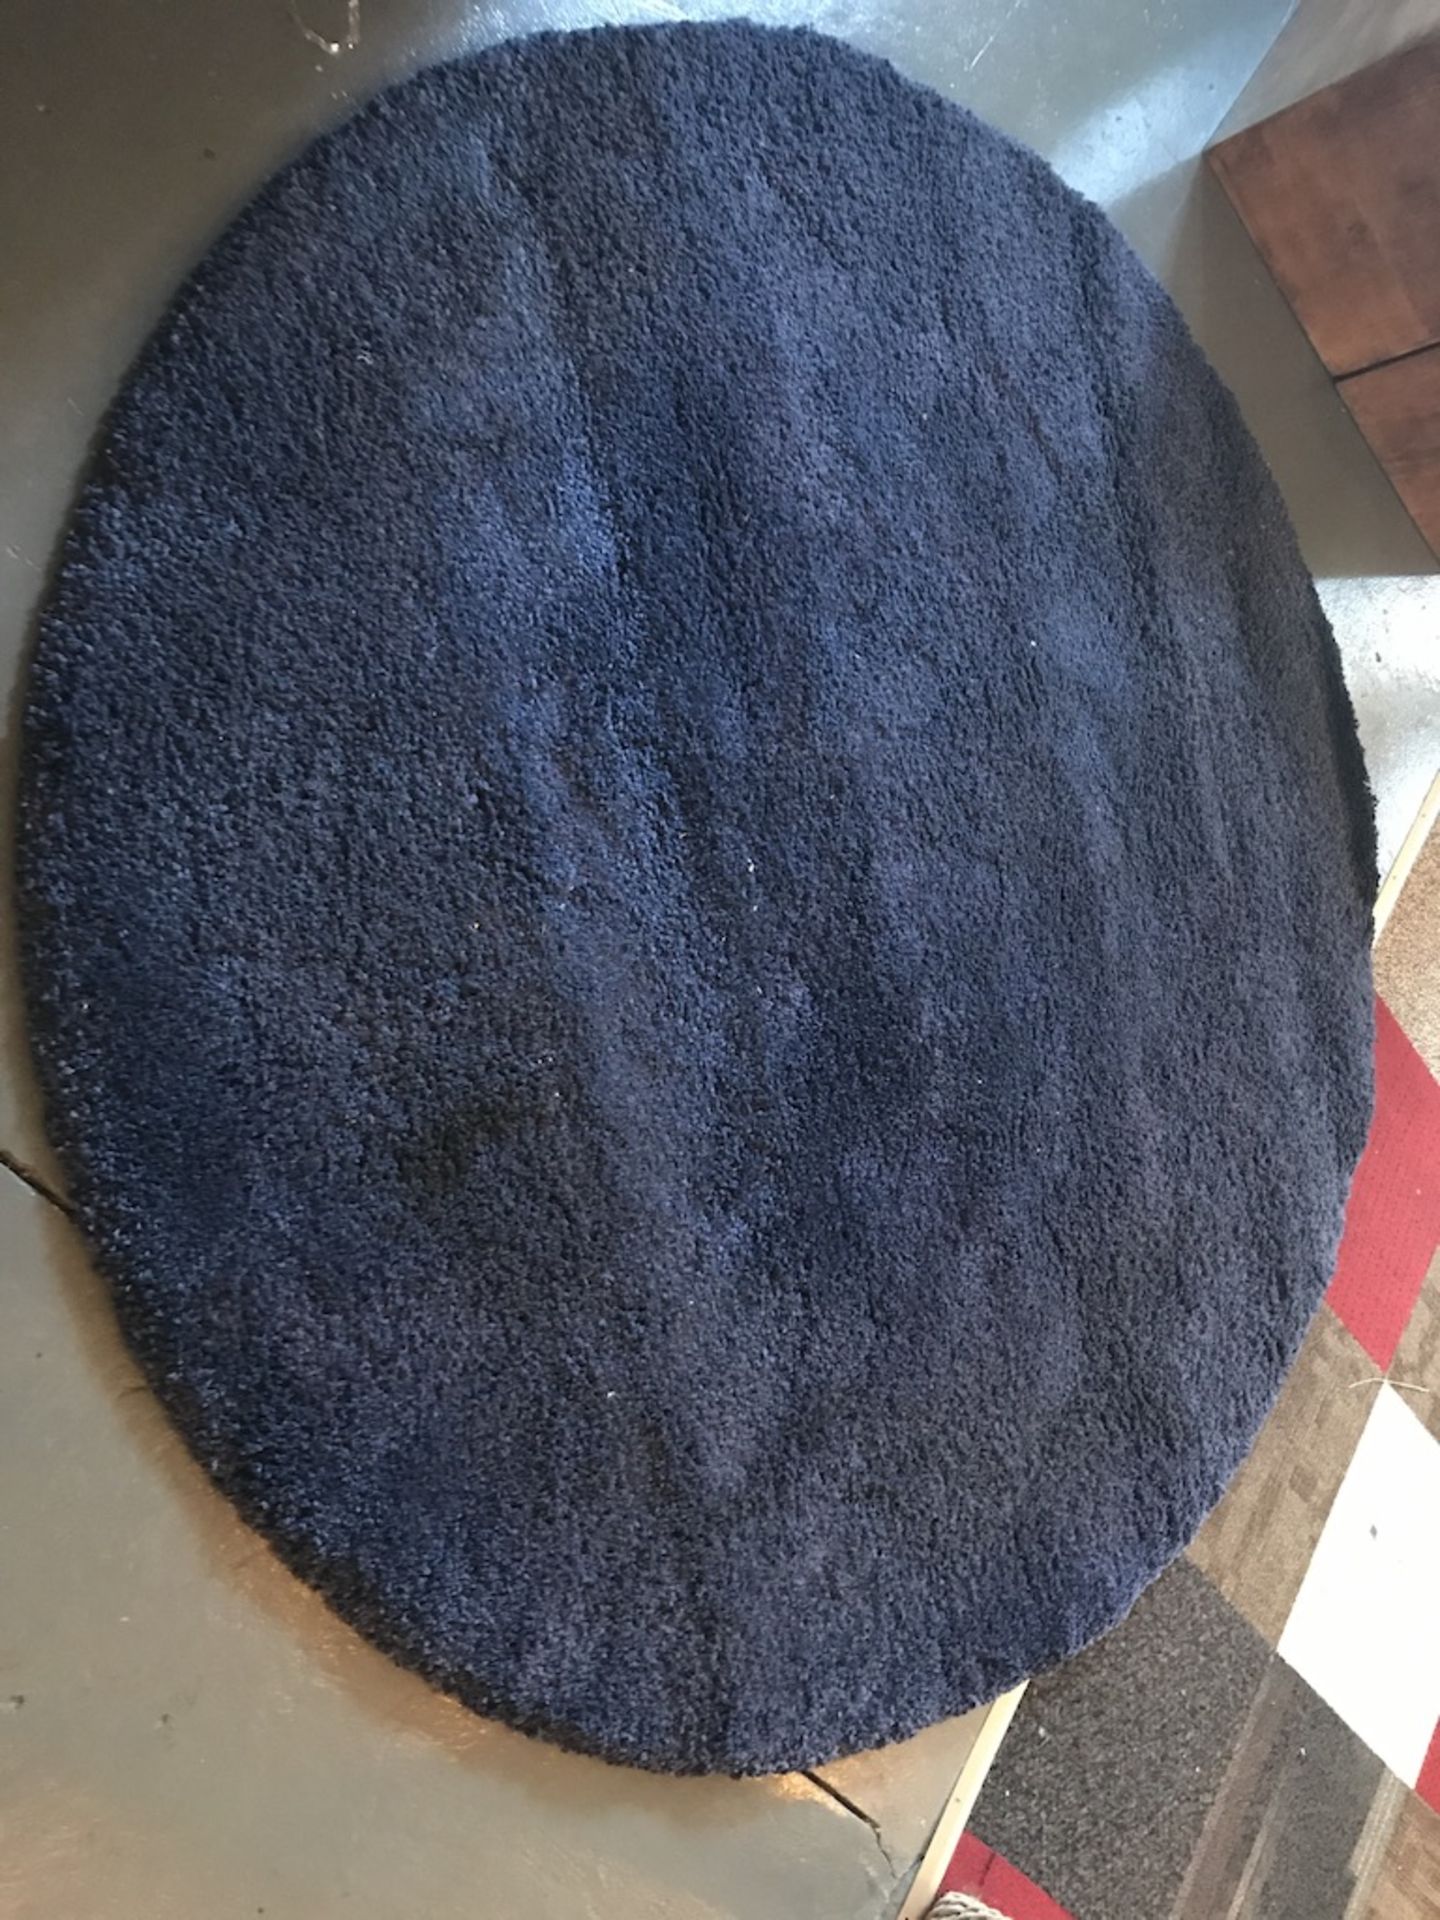 LOT OF: (4) 33" WIDE RUNNER FLOOR MATS AND (1) 7' ROUND BLUE RUG - Image 5 of 7